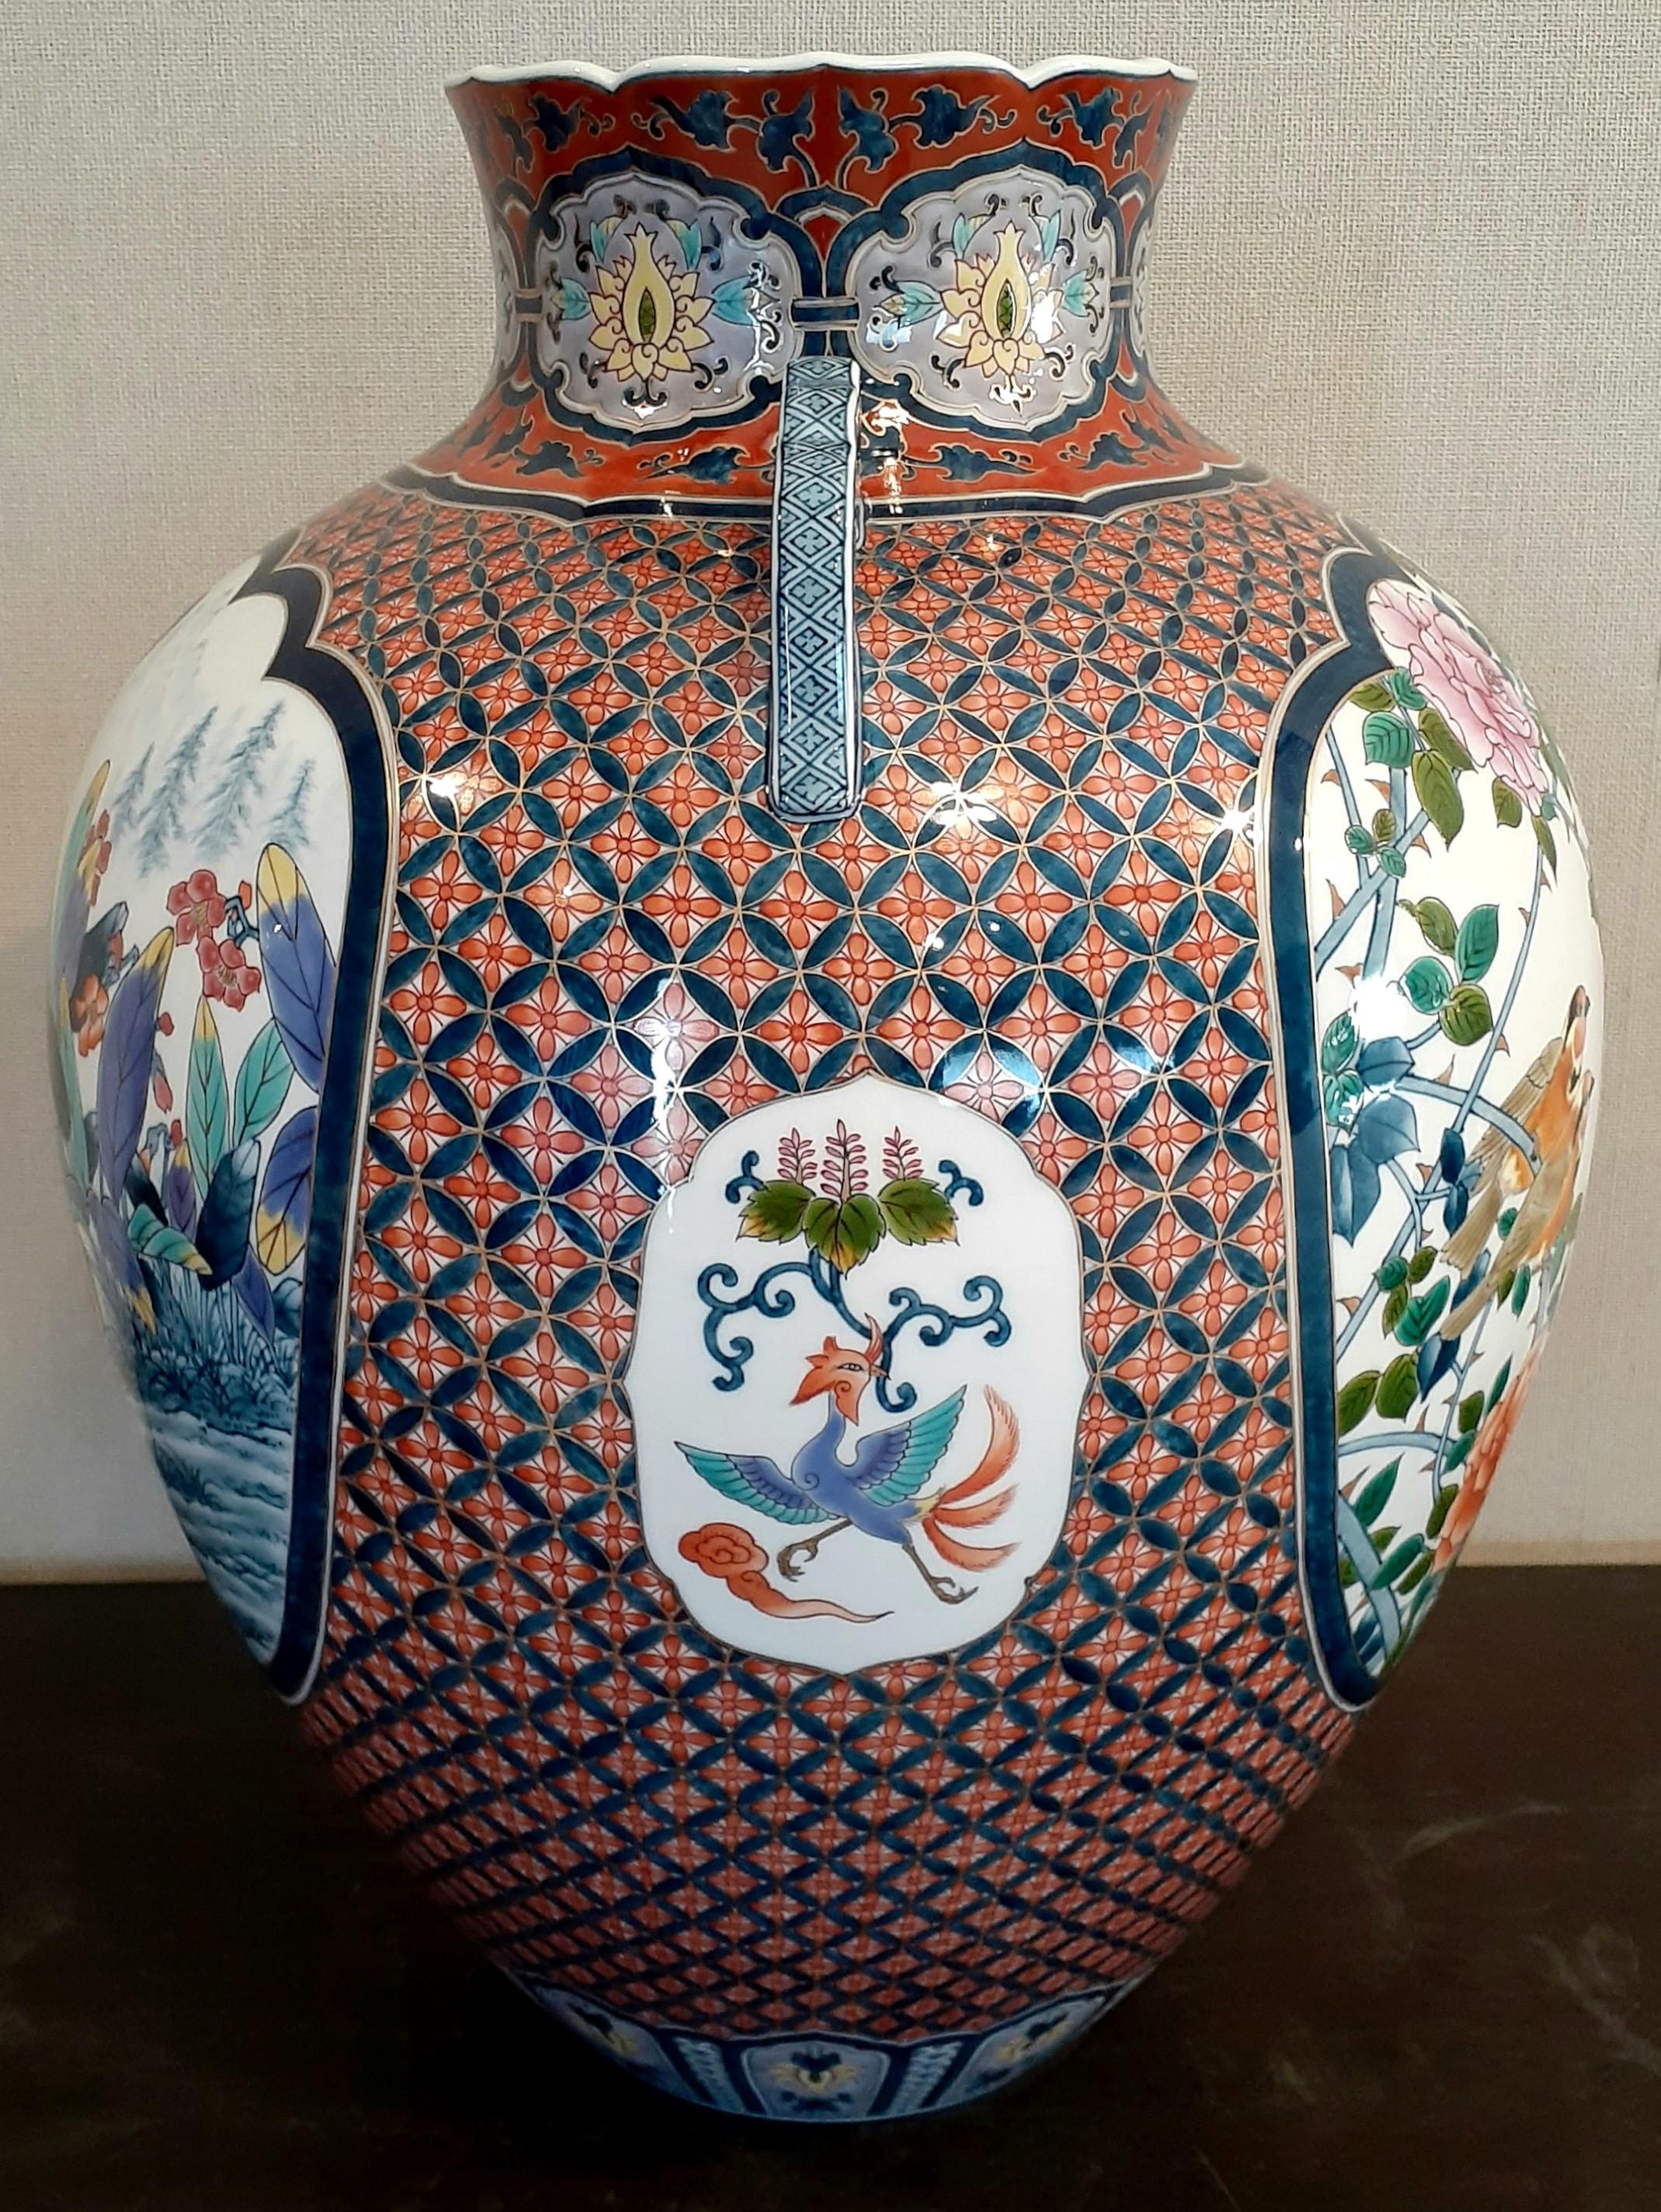 Unique very large highly collectable contemporary Japanese gilded Ko-Imari (Old Imari) decorative porcelain vase, intricately hand painted in blue, red, green, yellow and orange, on a stunningly shaped body with two graceful handles, a magnificent